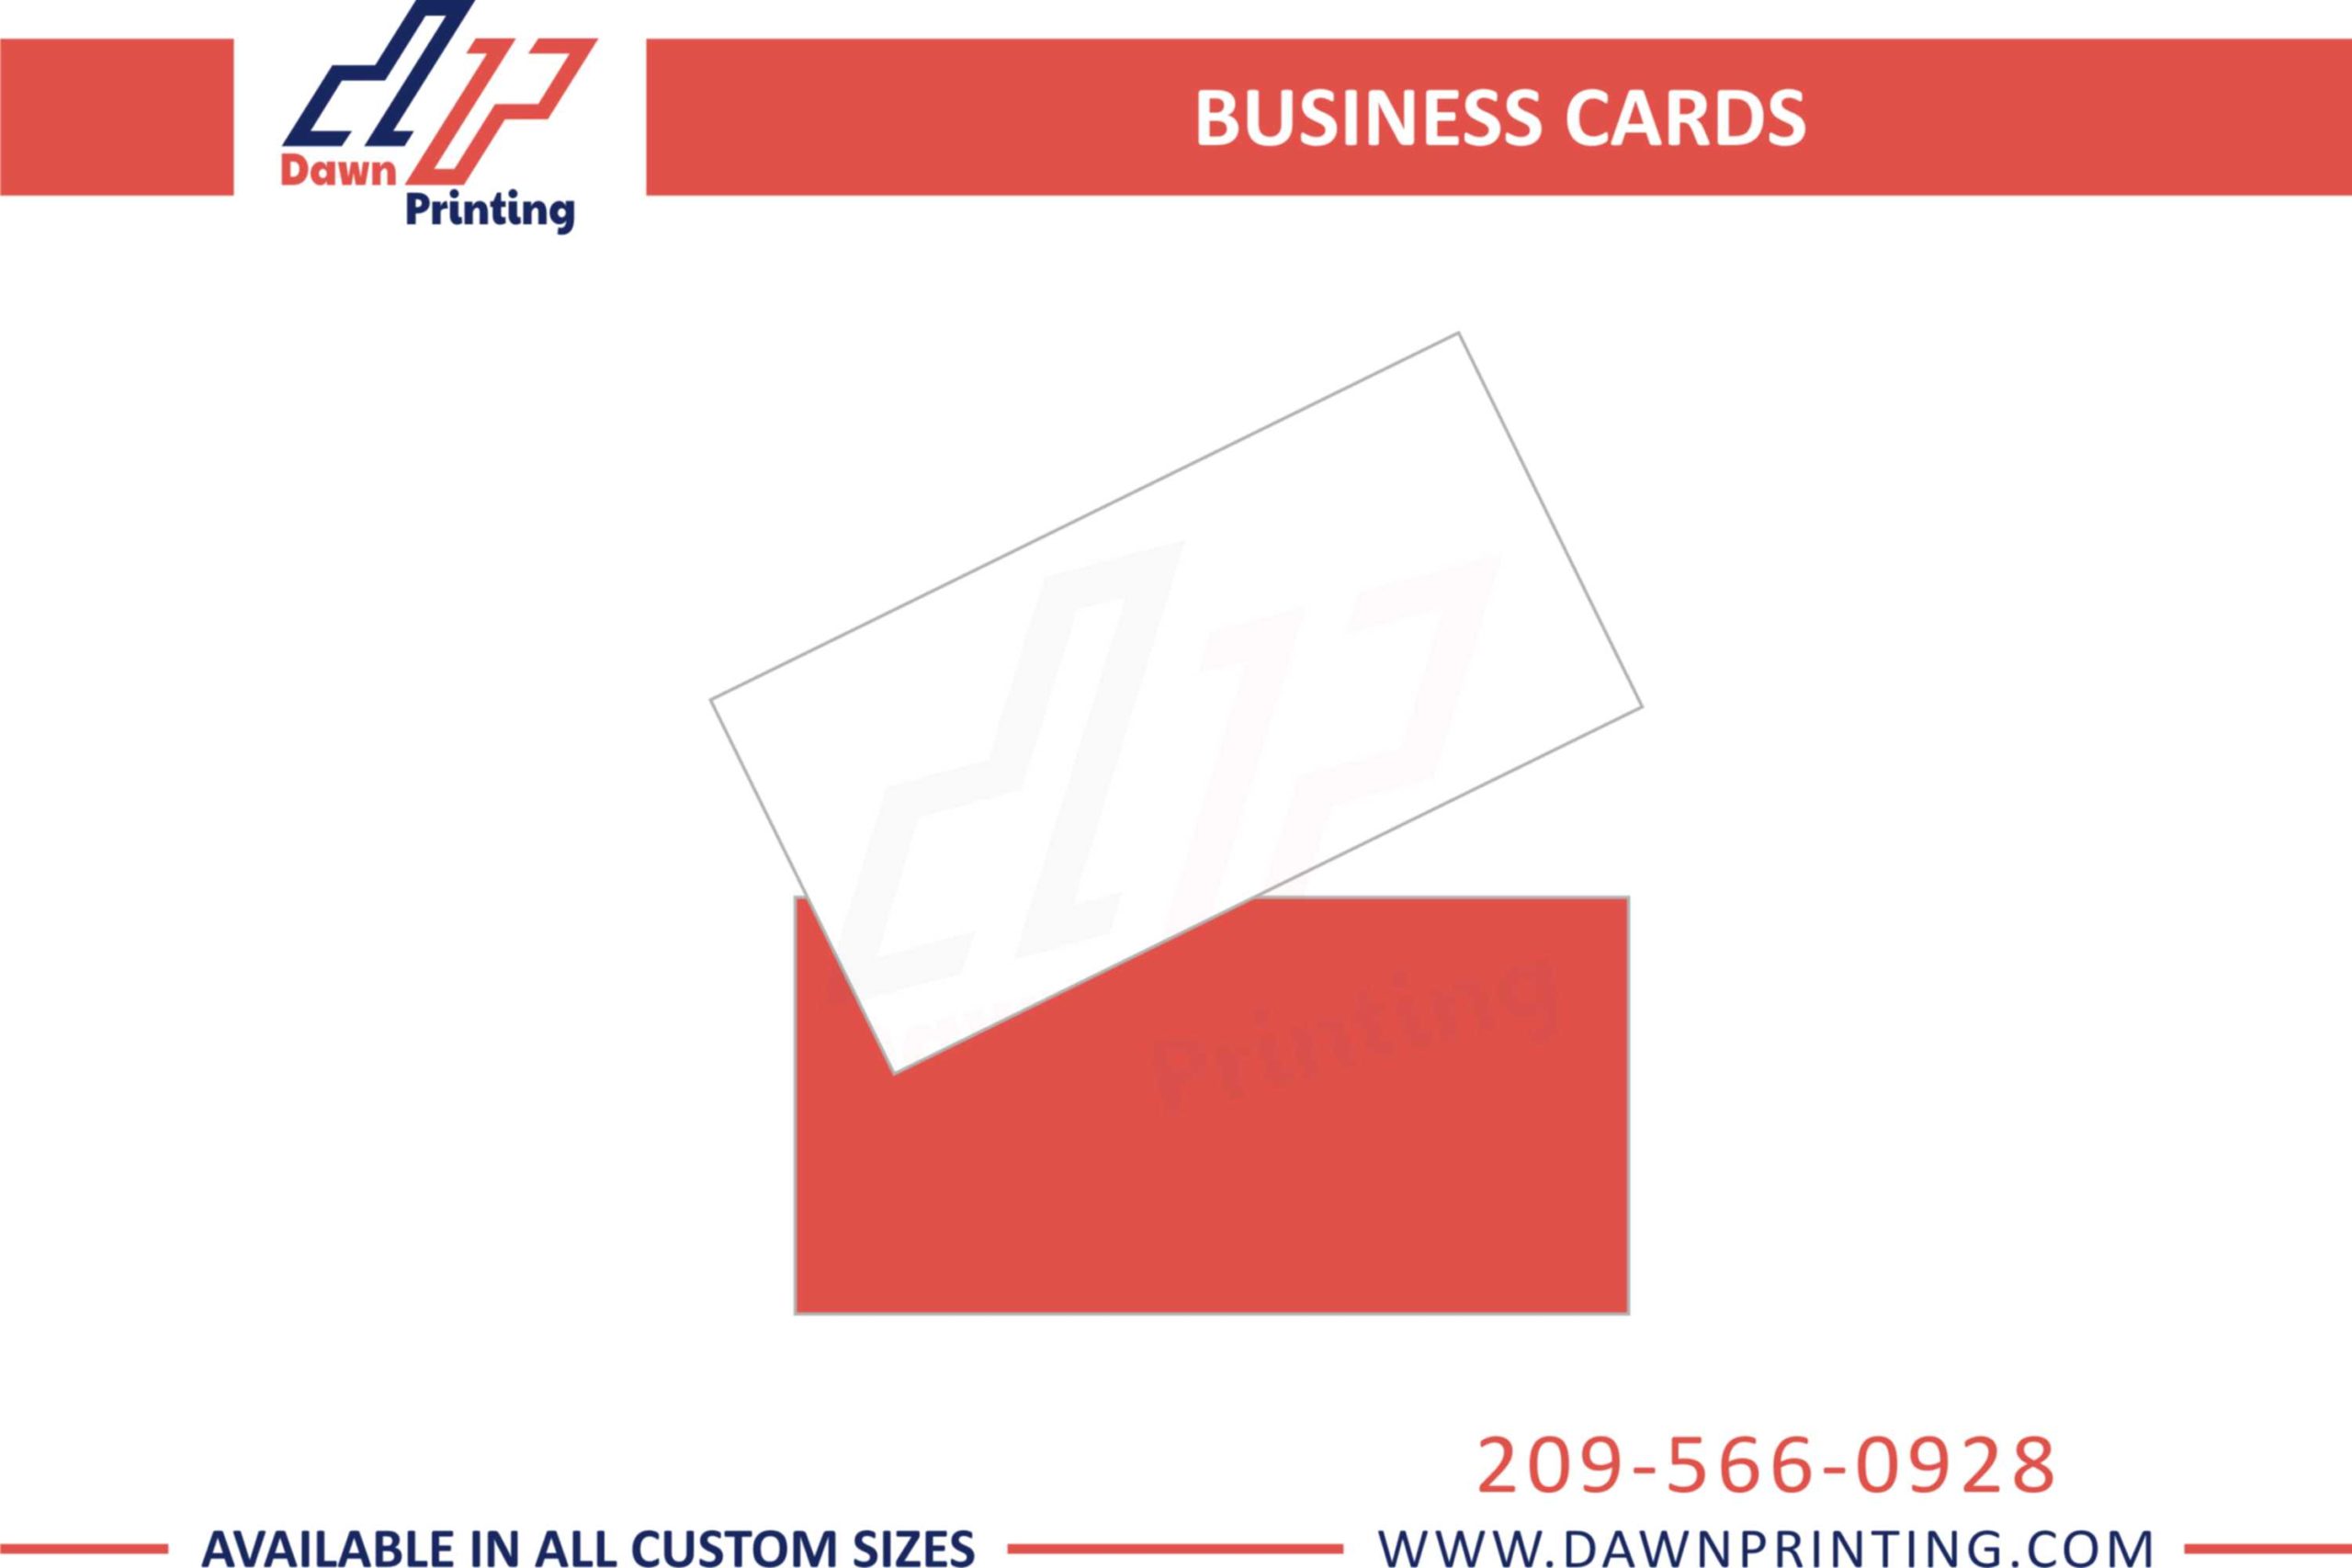 Professional Business Cards - Dawn Printing